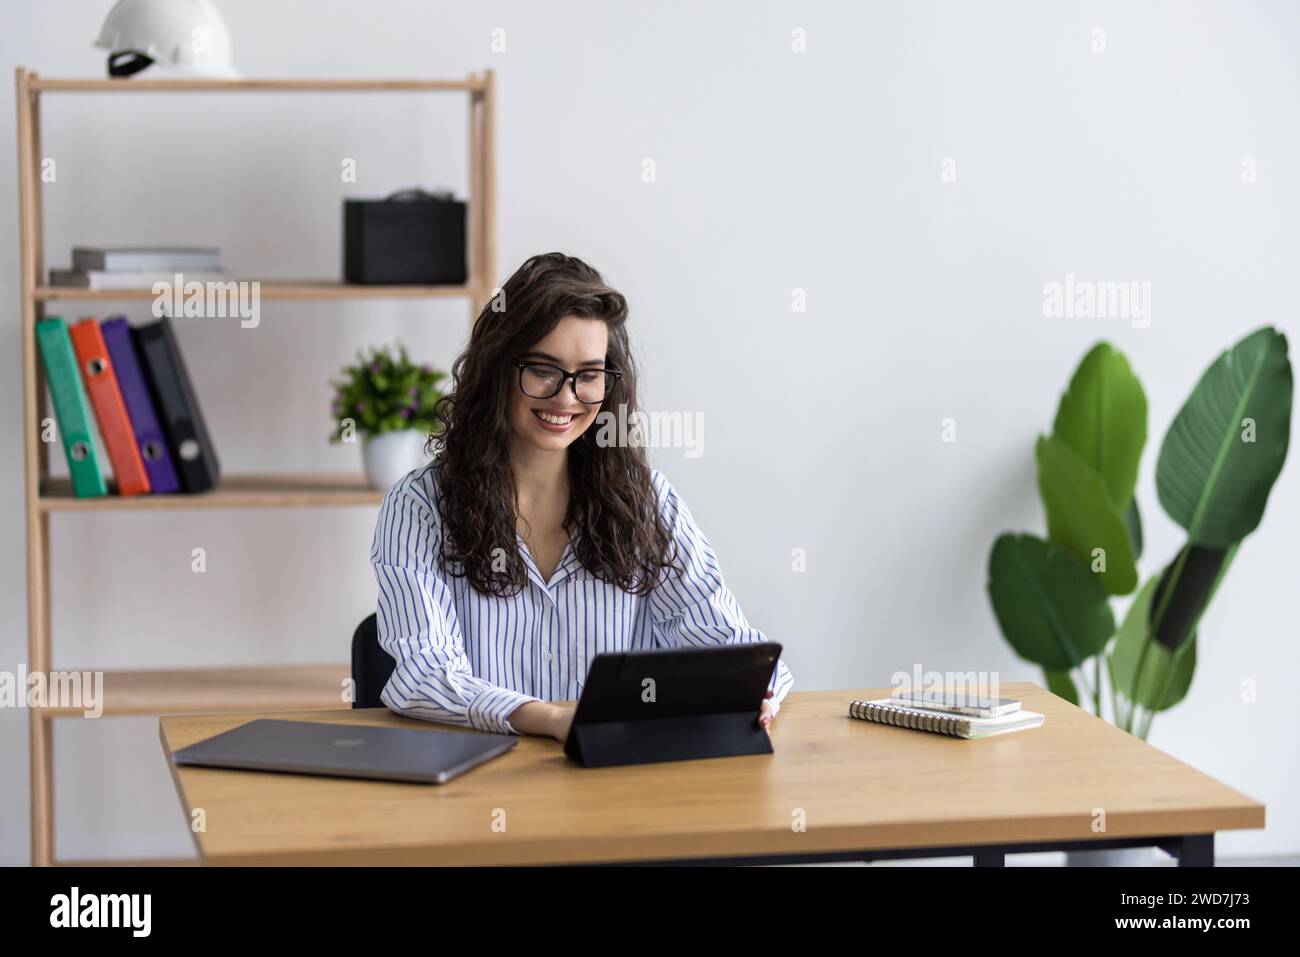 Attractive business woman using a digital tablet while standing in front of windows in an office Stock Photo